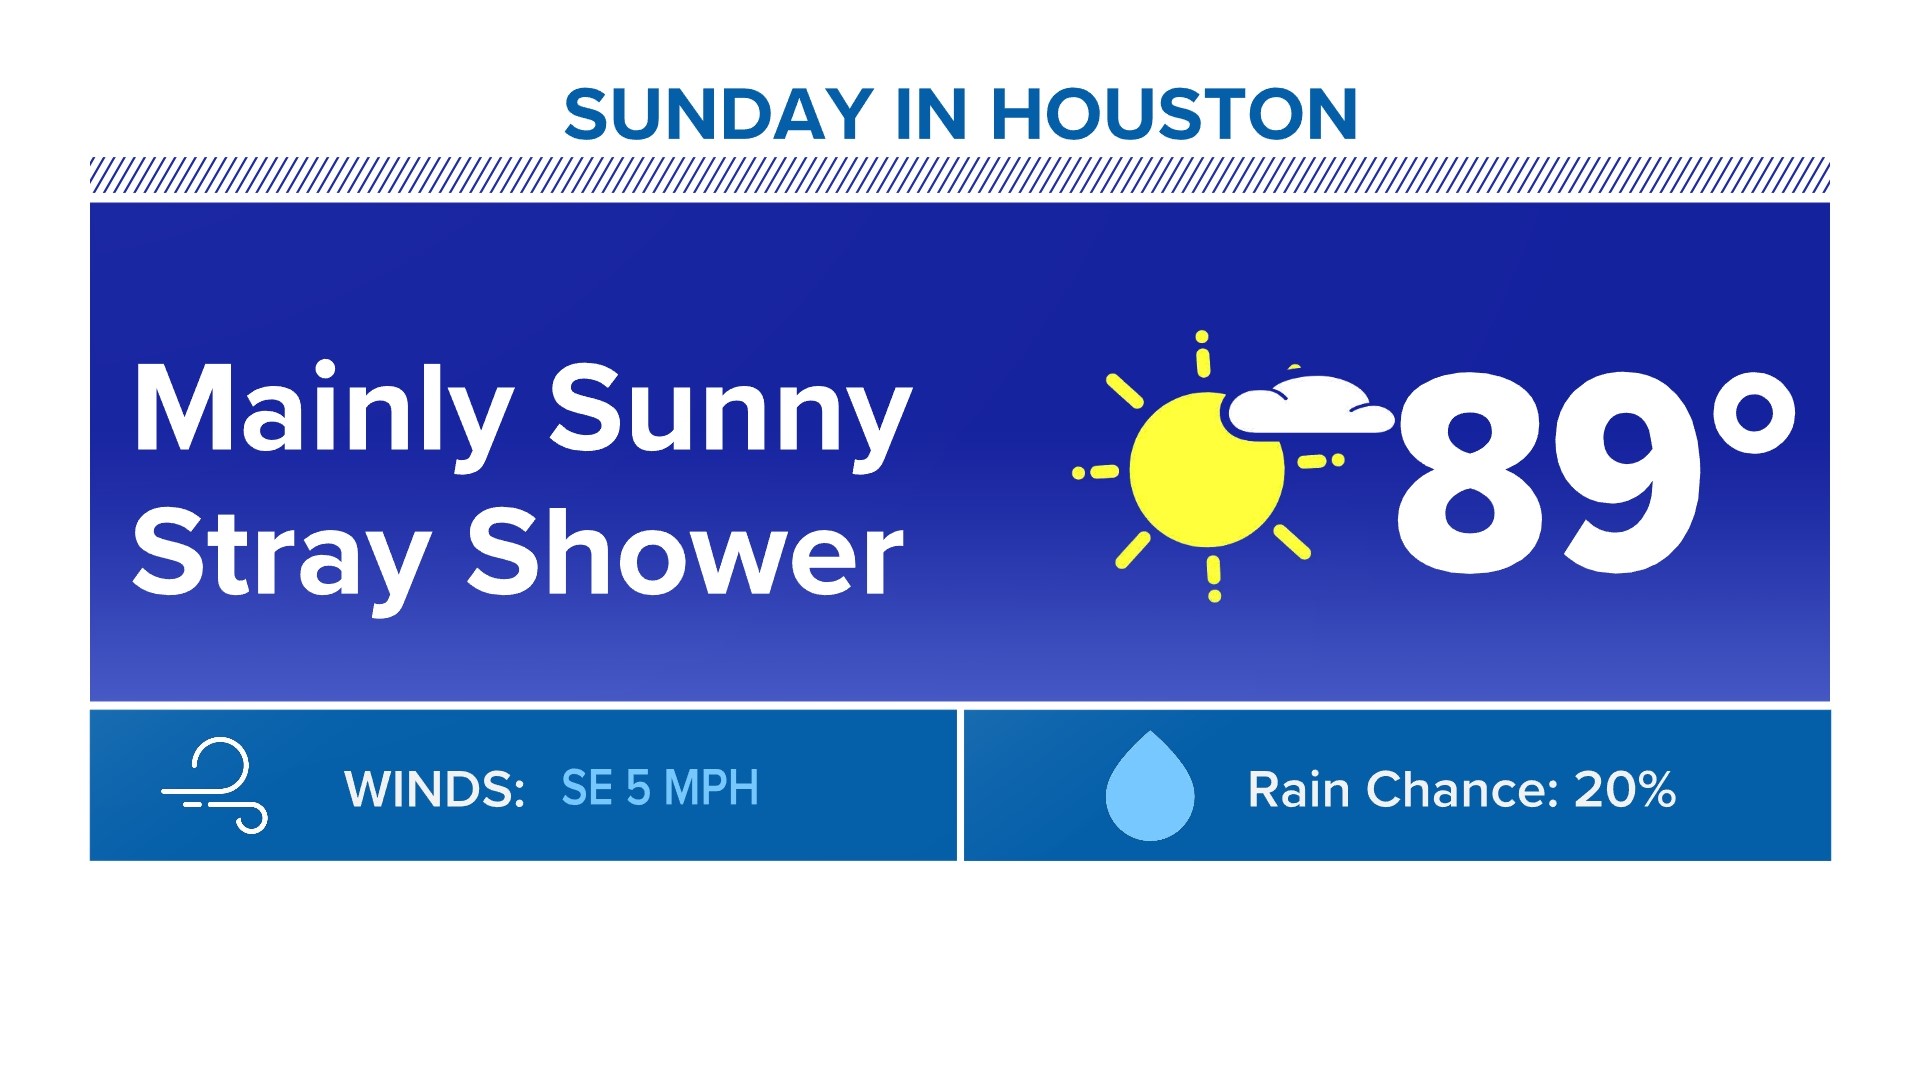 Seasonably hot temps with low rain chances continue for Sunday.